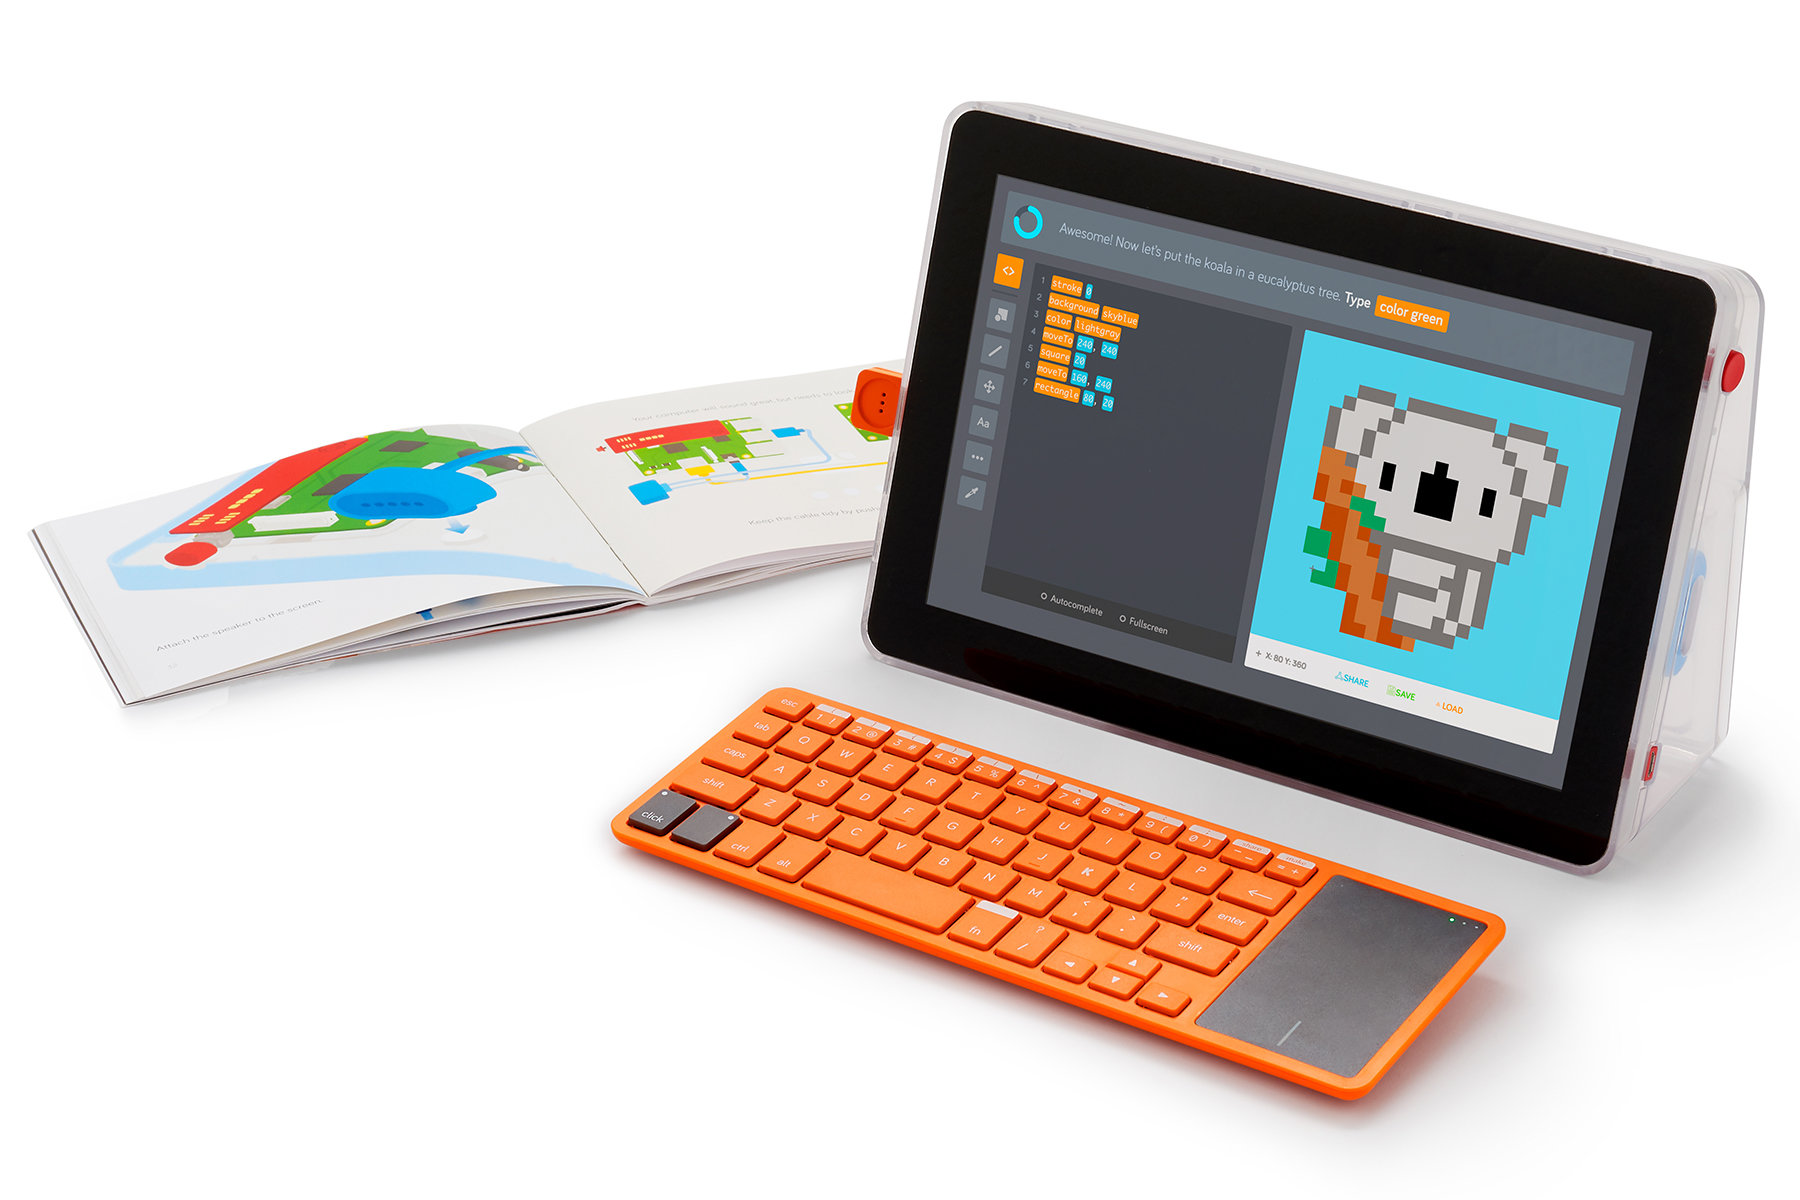 Kano Bines Its Coding Kits For A Diy Laptop Engadget